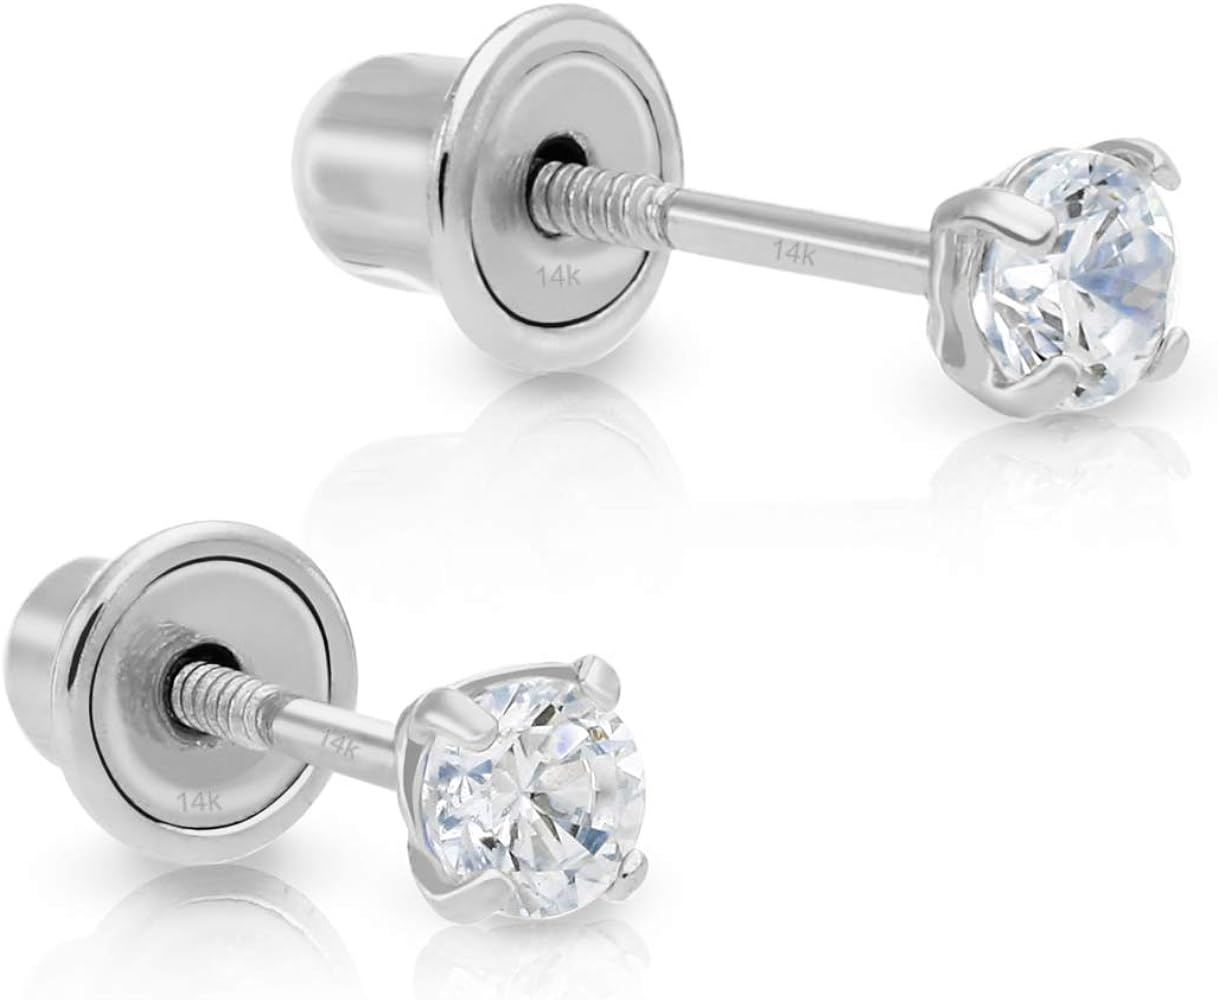 14k White Gold Solitaire Round Cubic Zirconia Stud Earrings Review